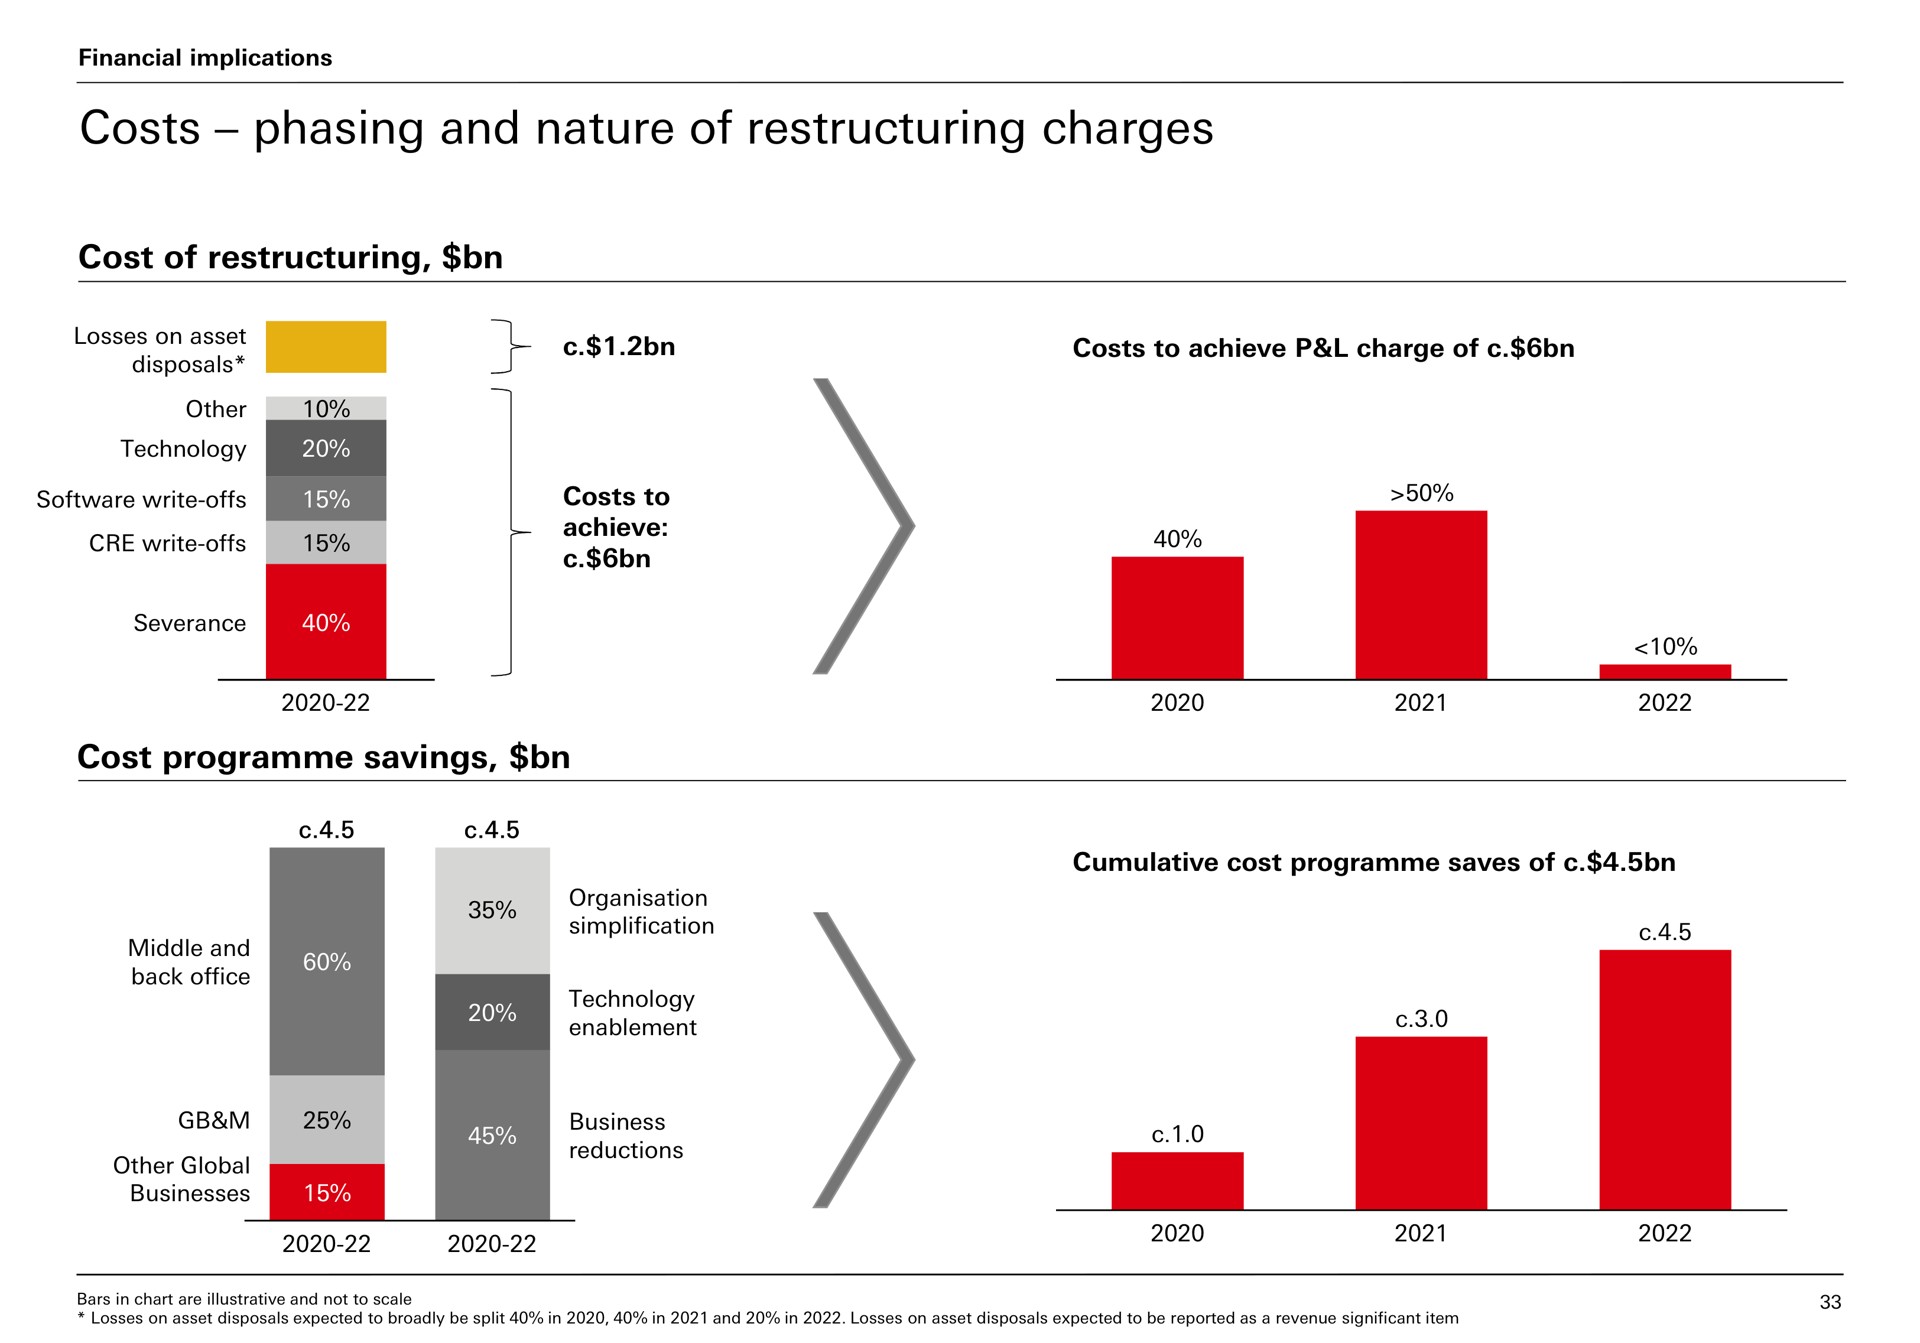 costs phasing and nature of charges | HSBC